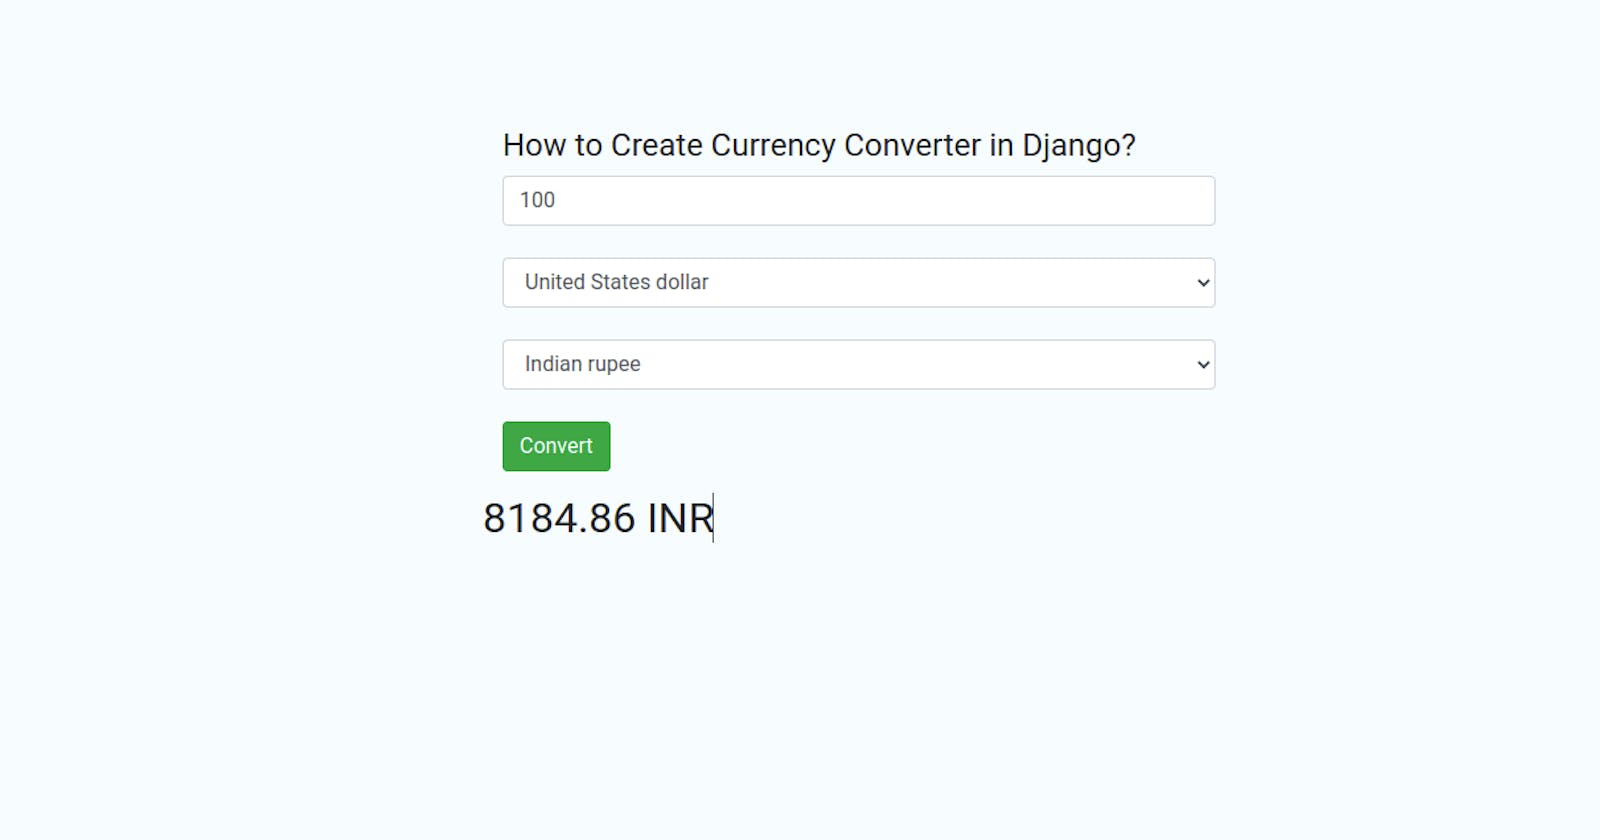 How to Create a Currency Converter in Django?